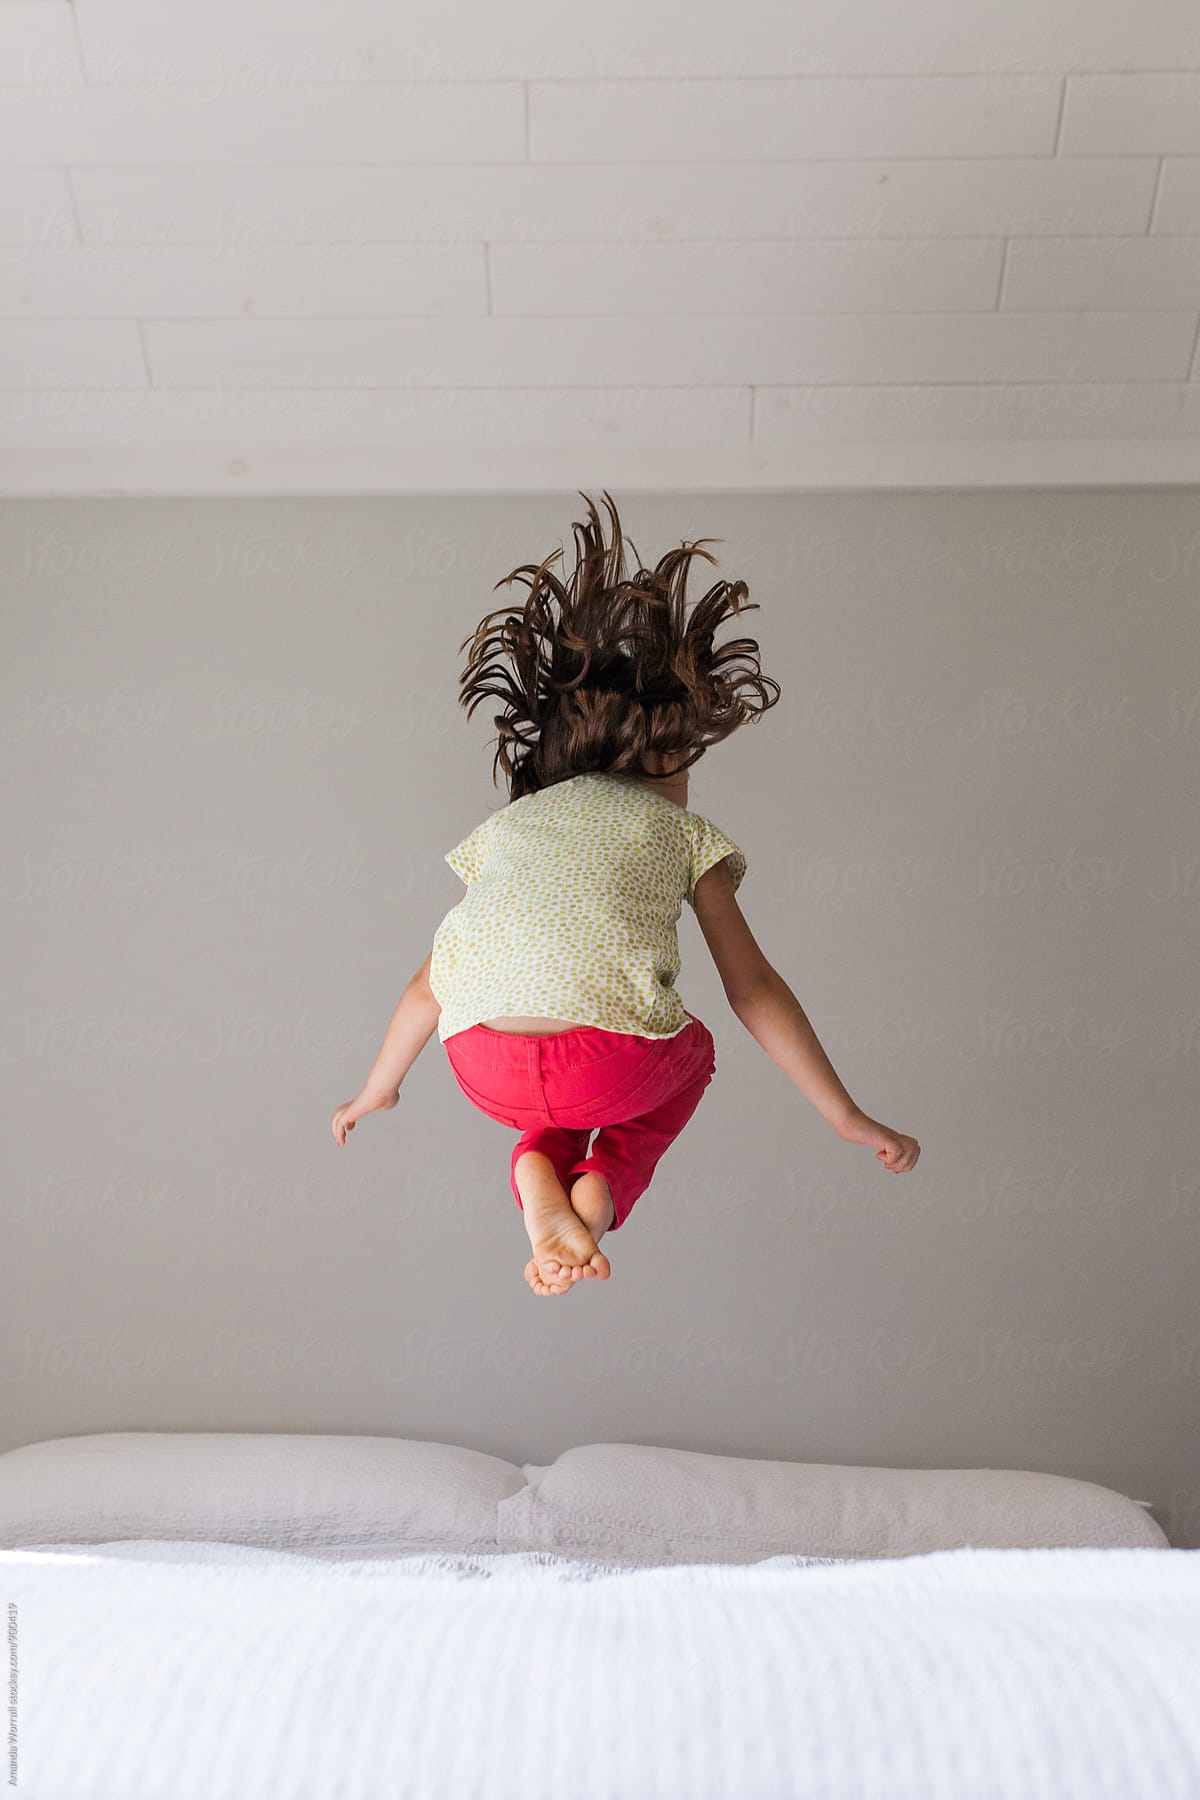 Unrecoginizable young girl wearing bright clothing jumping on a bed in a neutral bedroom